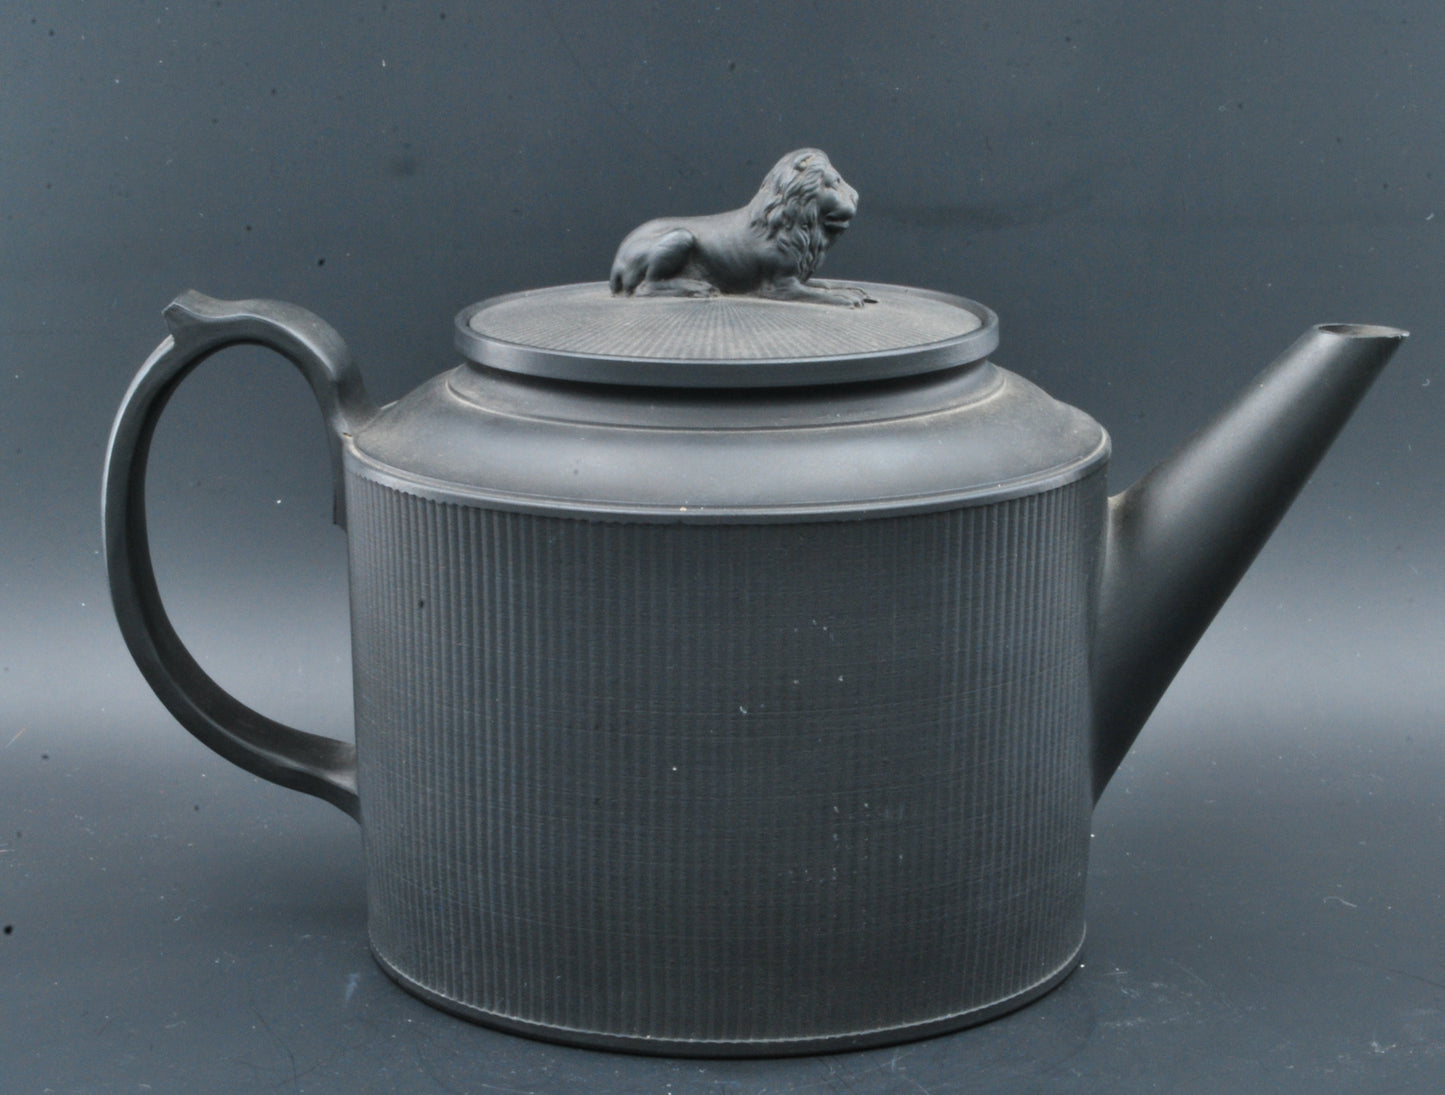 Teapot, with engine-turned decoration